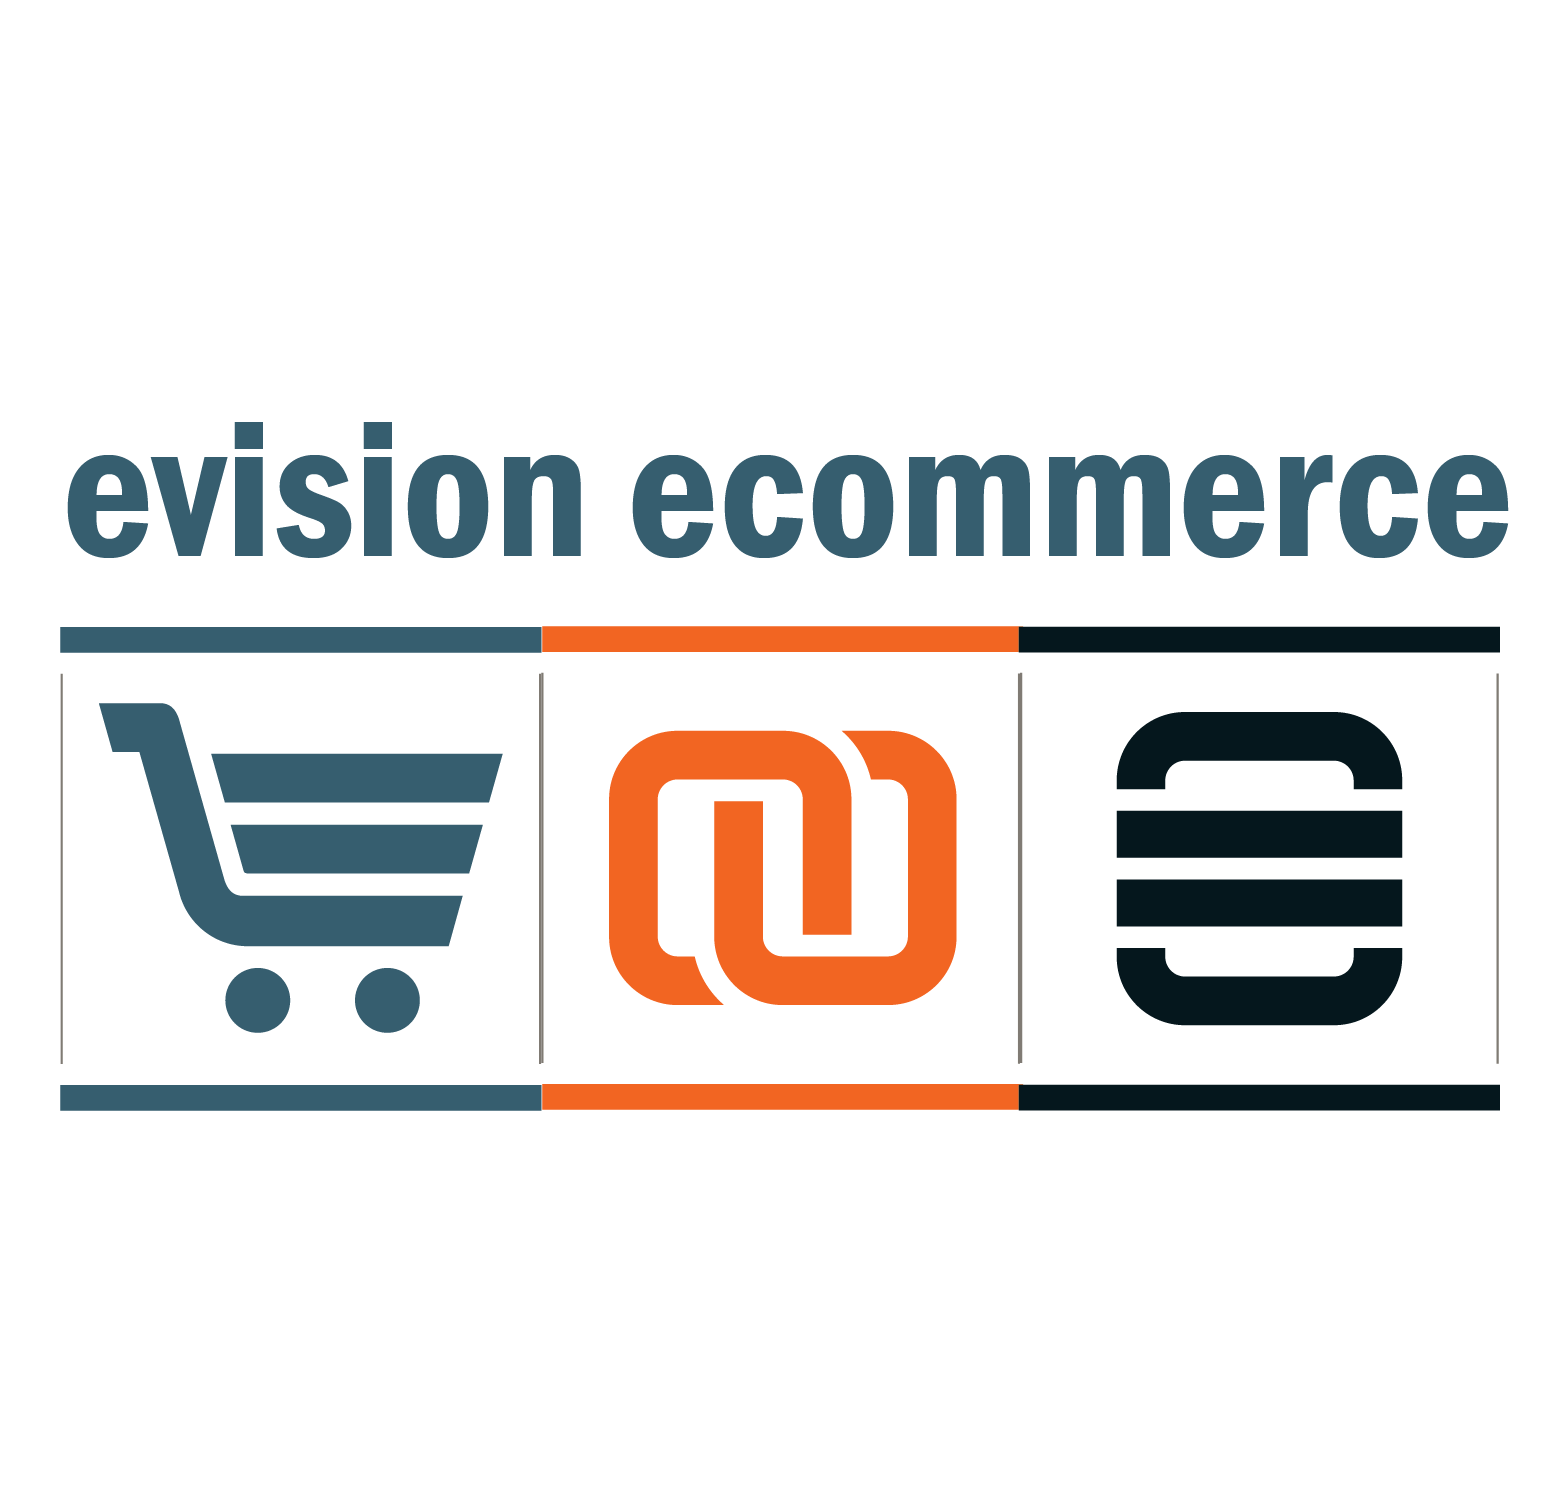 evision ecommerce